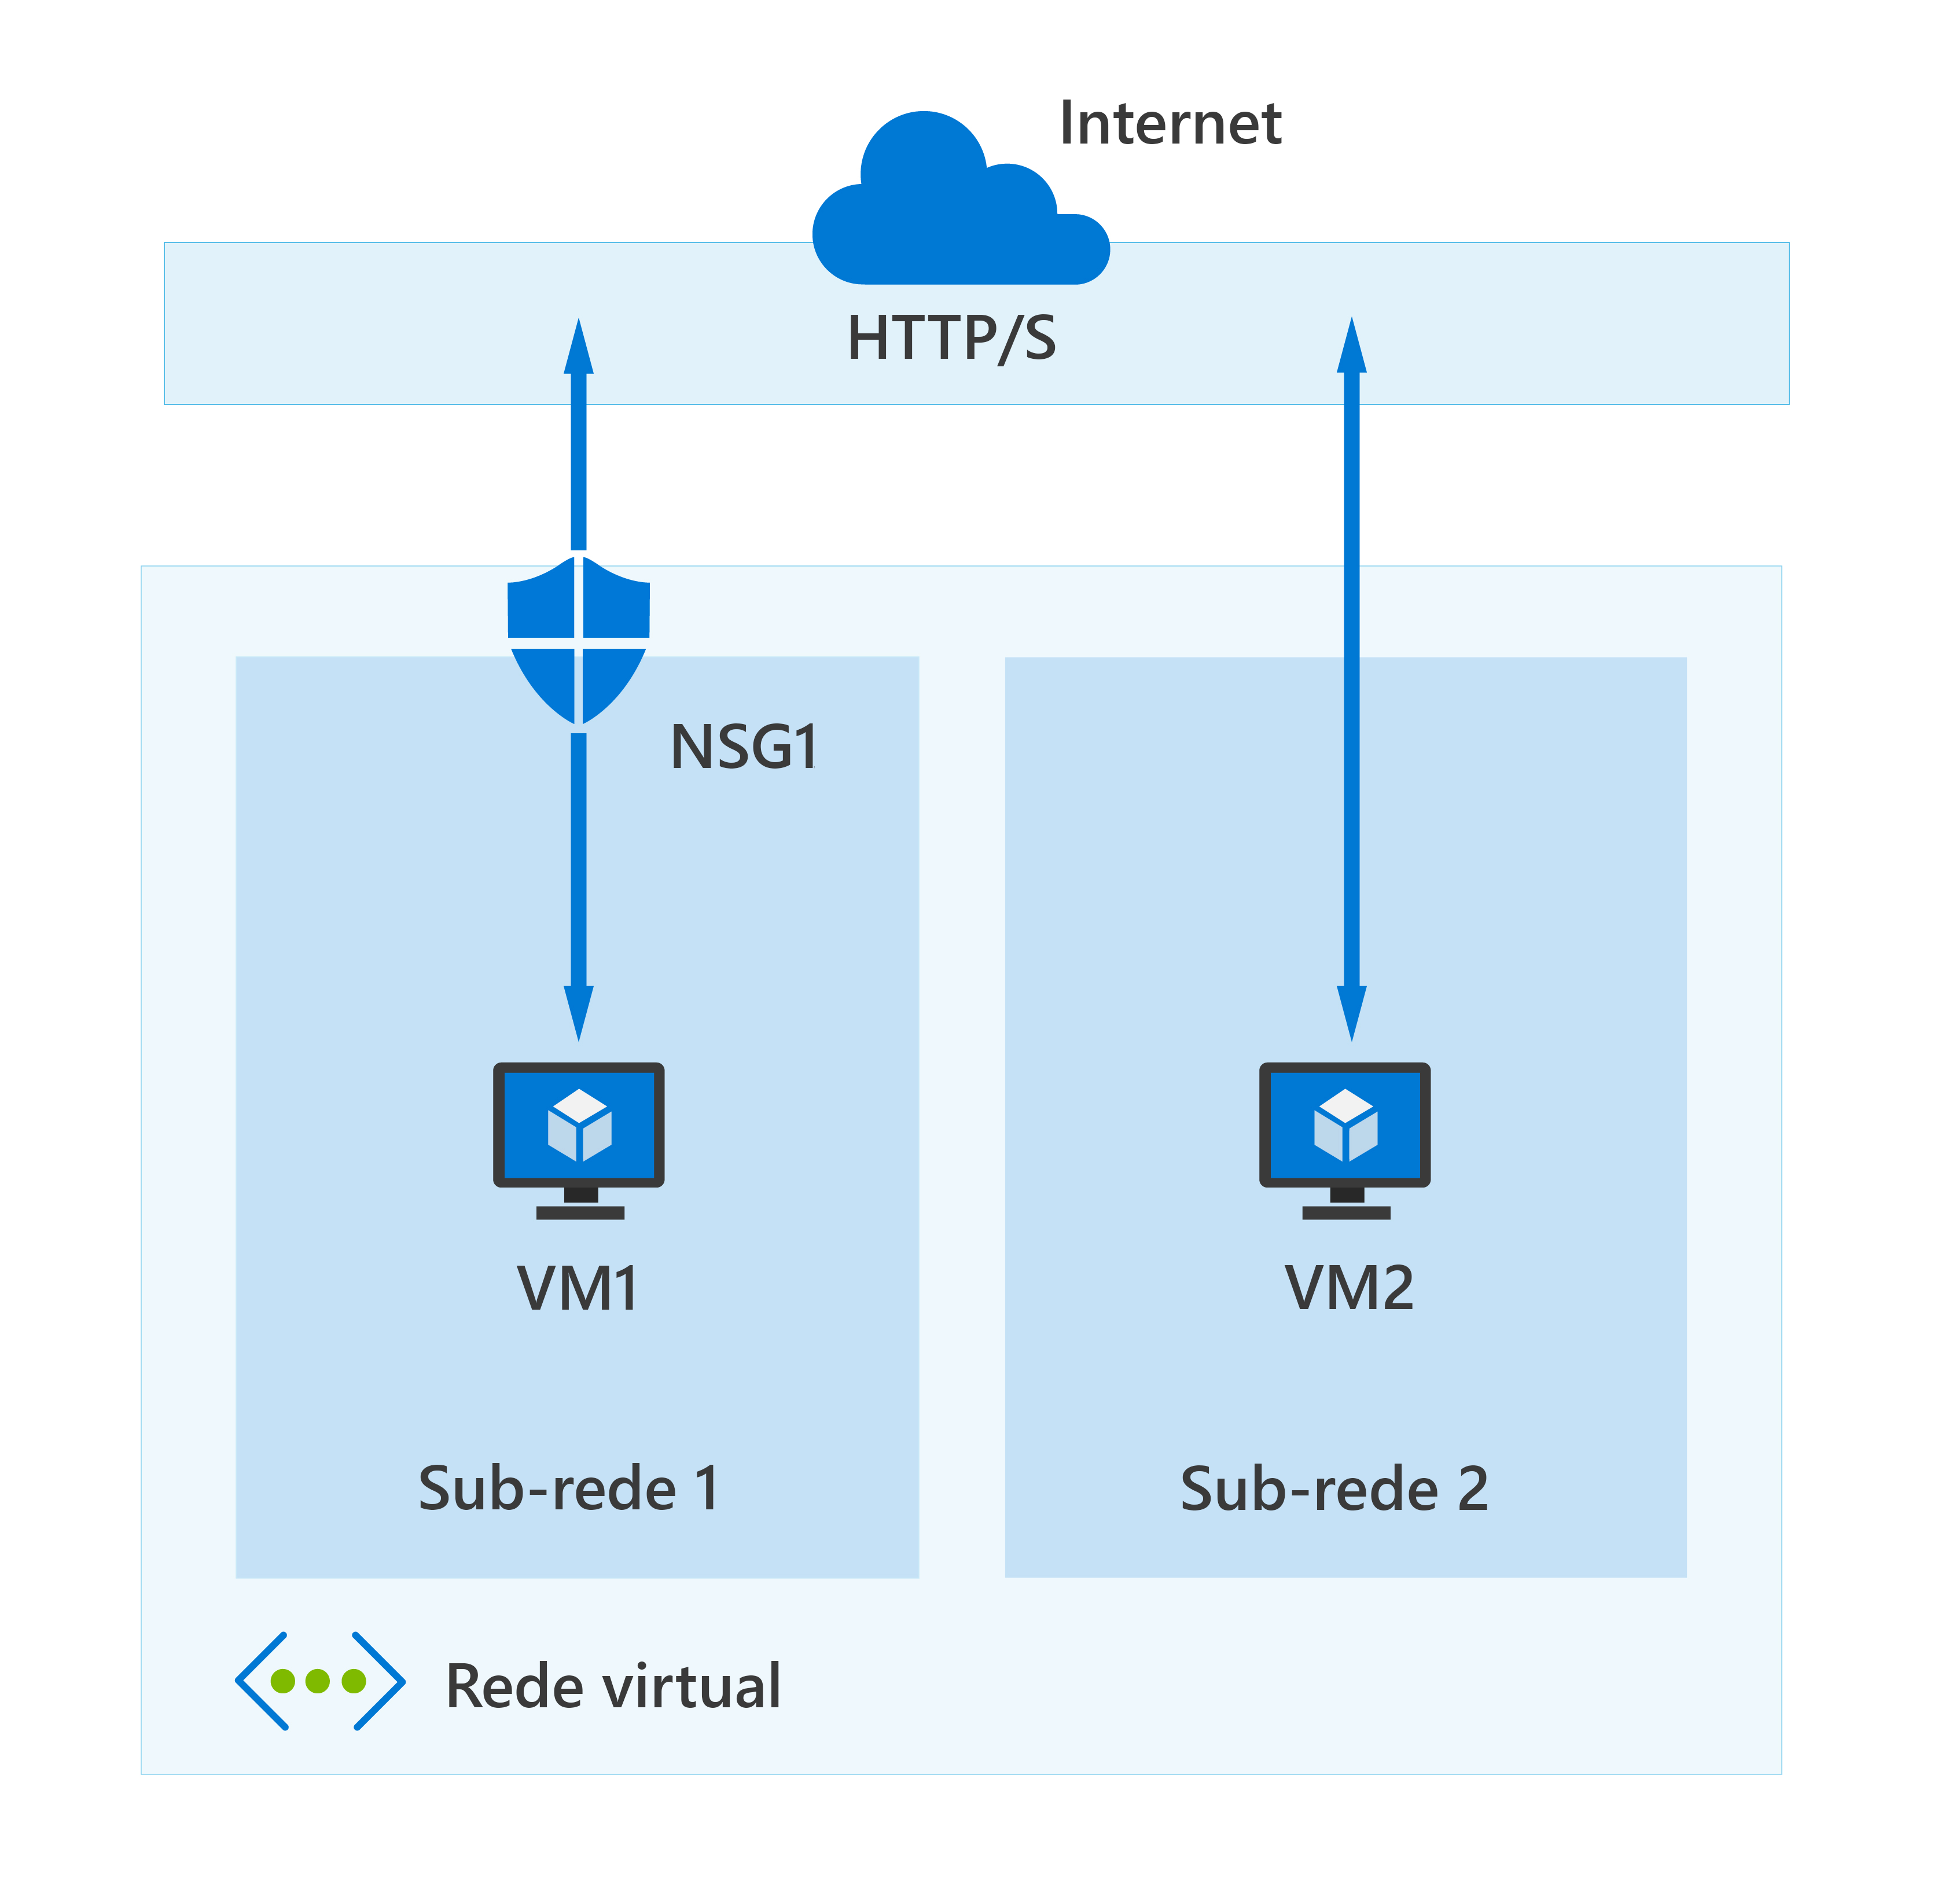 Diagram showing a simplified virtual network with two subnets each with a dedicated virtual machine resource, the first subnet has a network security group and the second subnet doesn't.